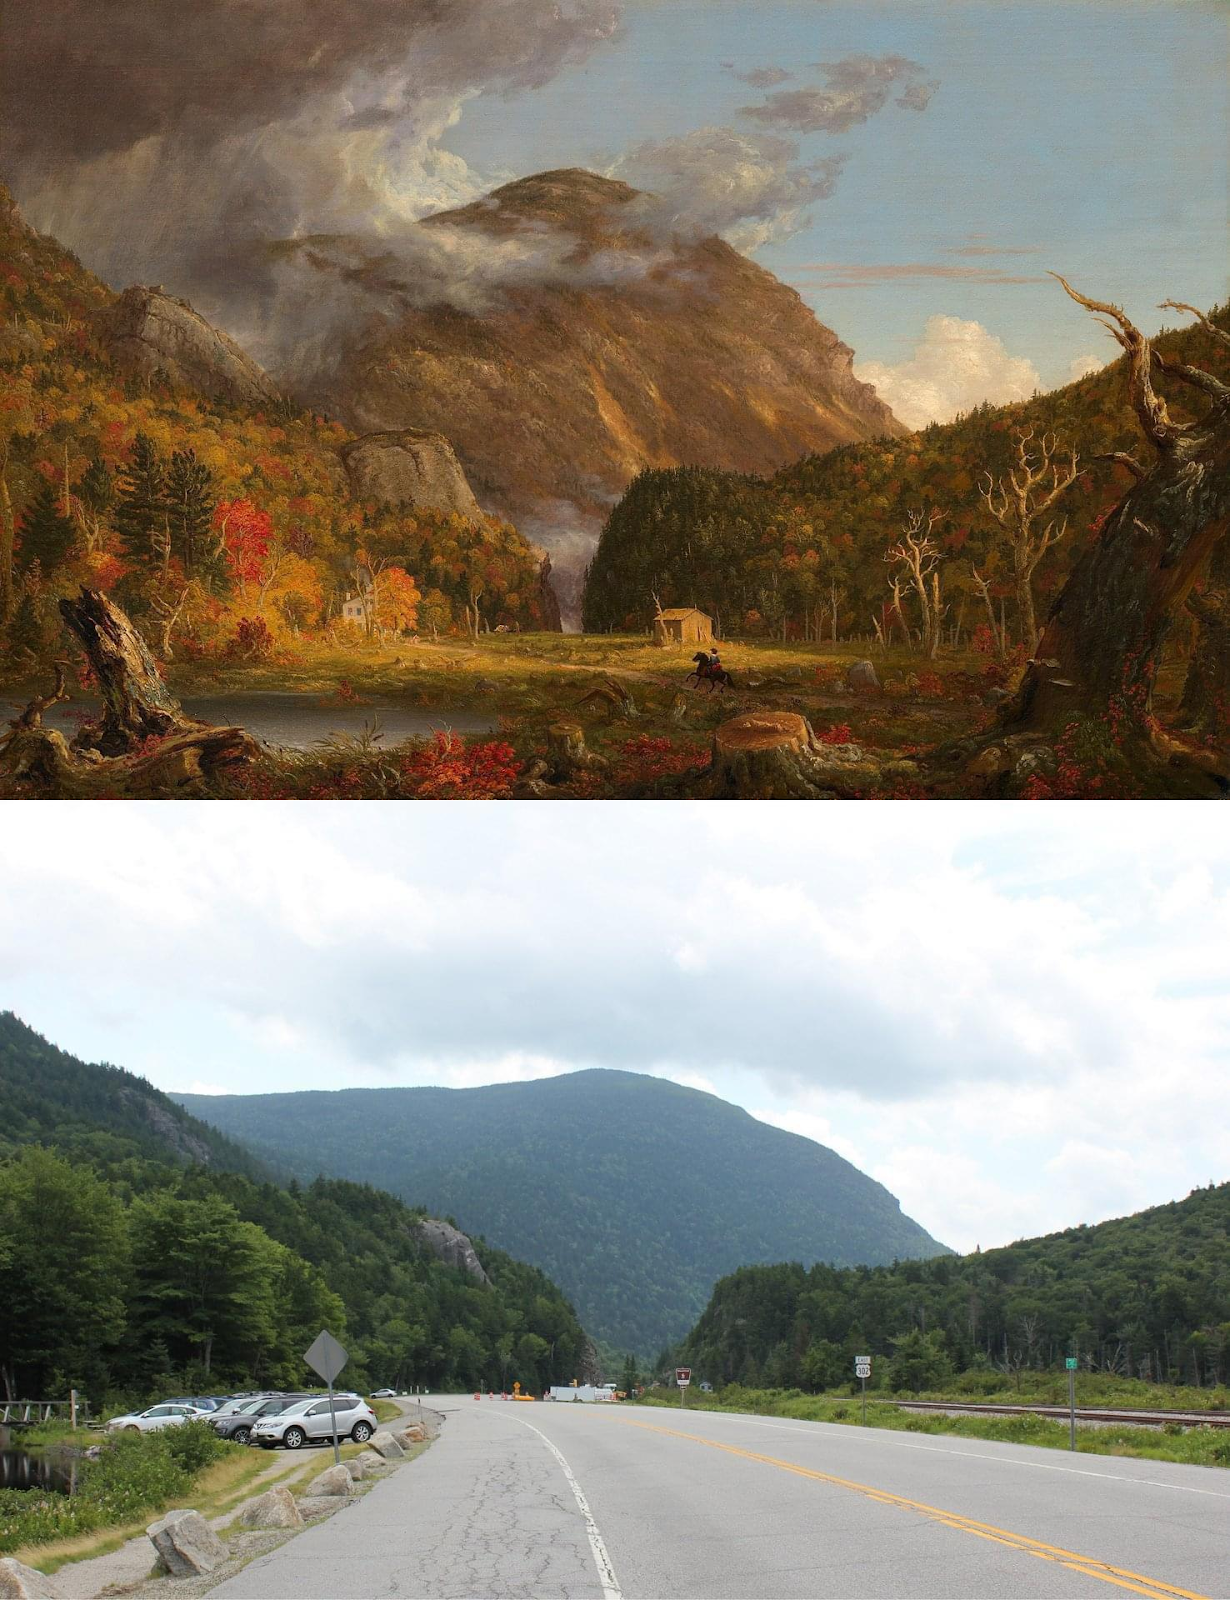 Food for Our Minds and Spirits: Crawford Notch